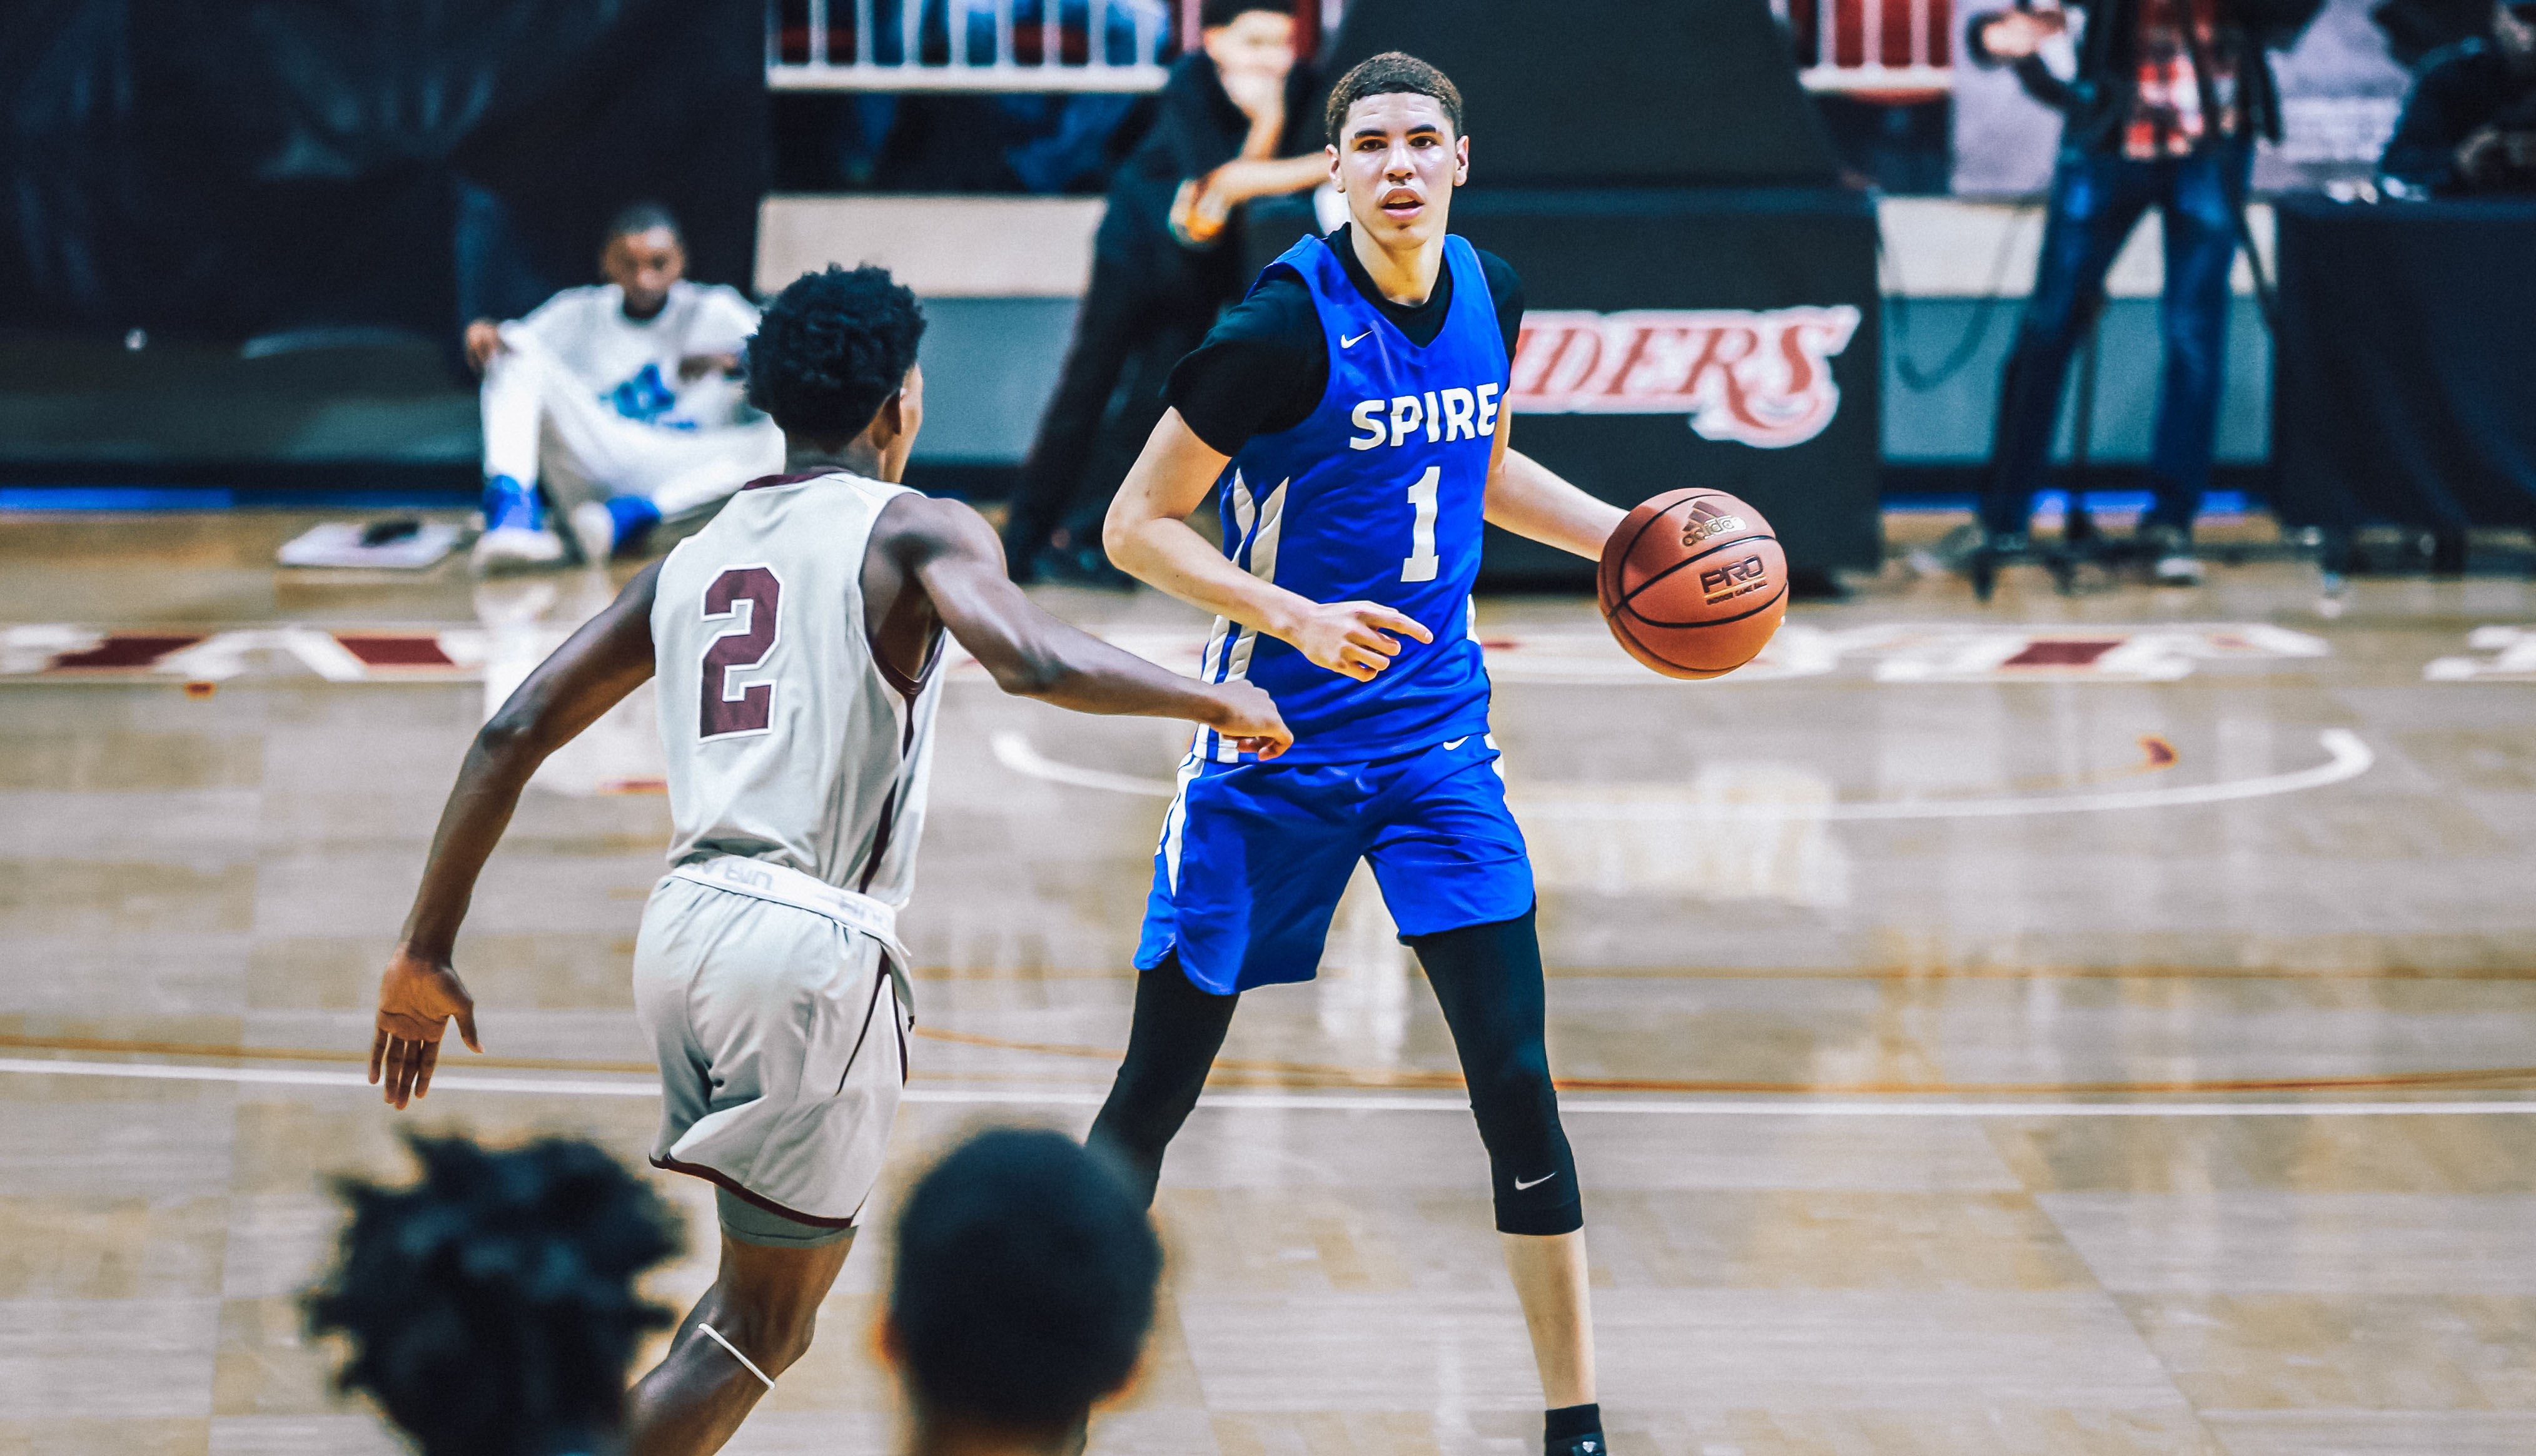 FloSports Announces Exclusive Worldwide Access to SPIRE Institute Boys Basketball Games Starring